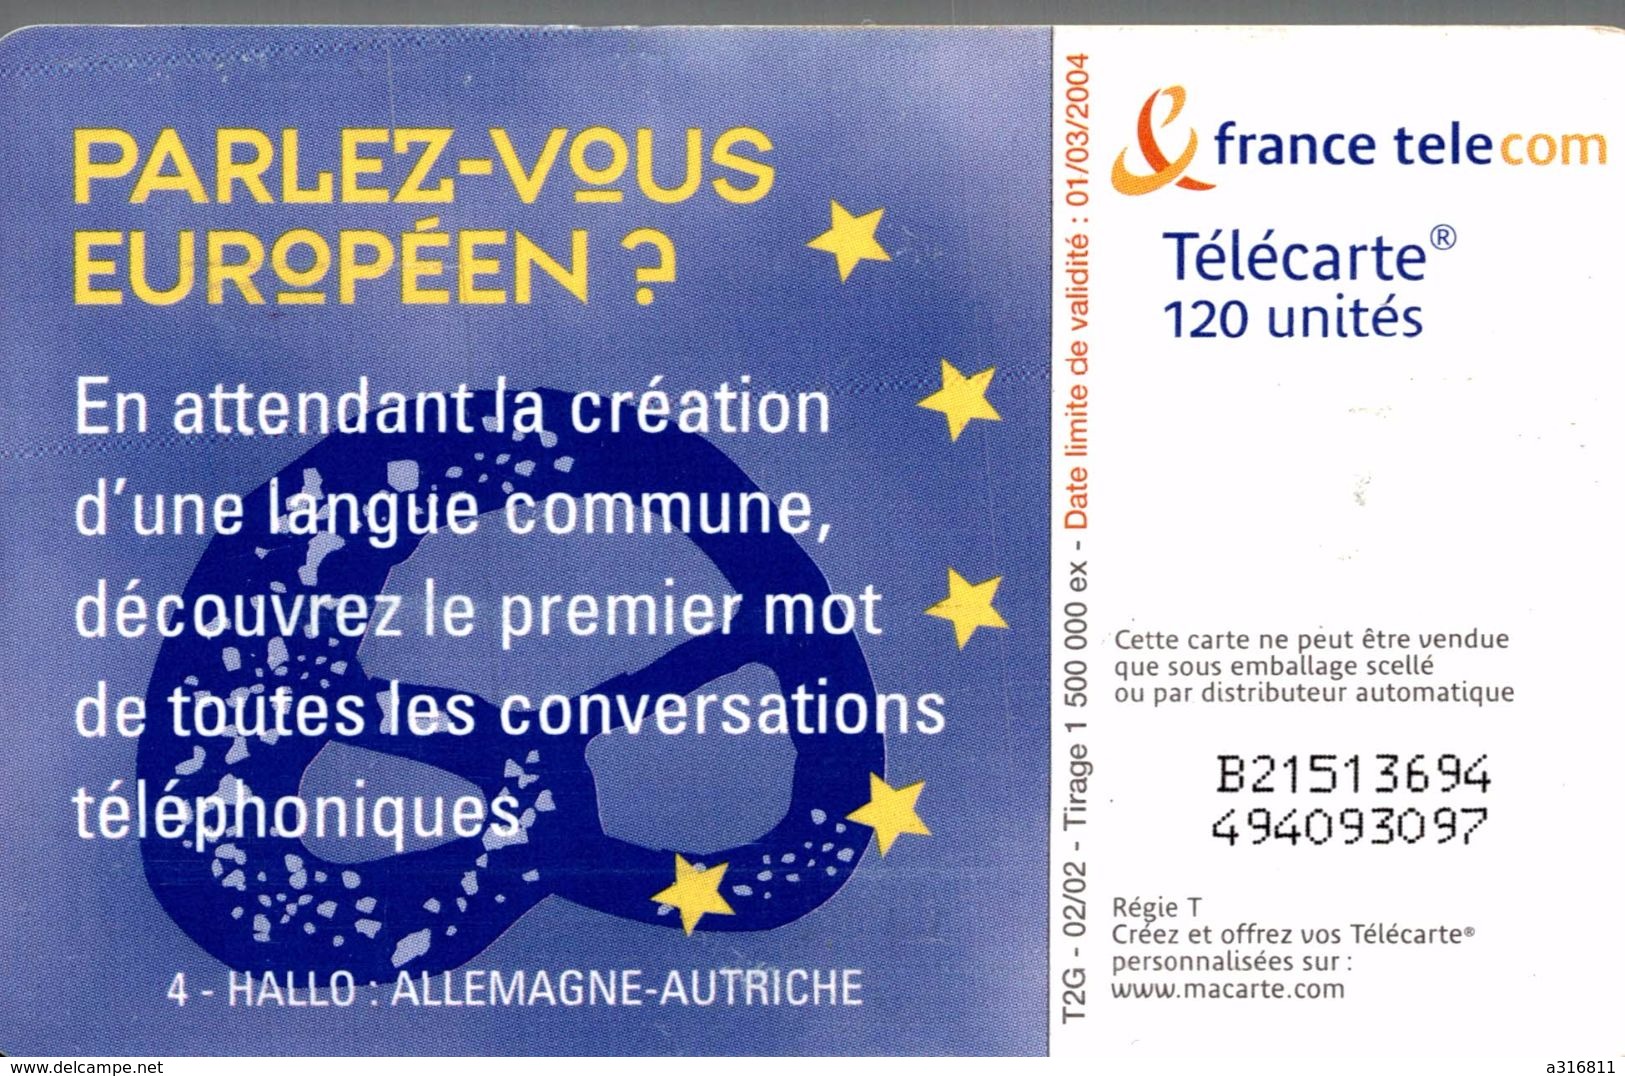 Parlez Vous Europeen - Phonecards: Private Use